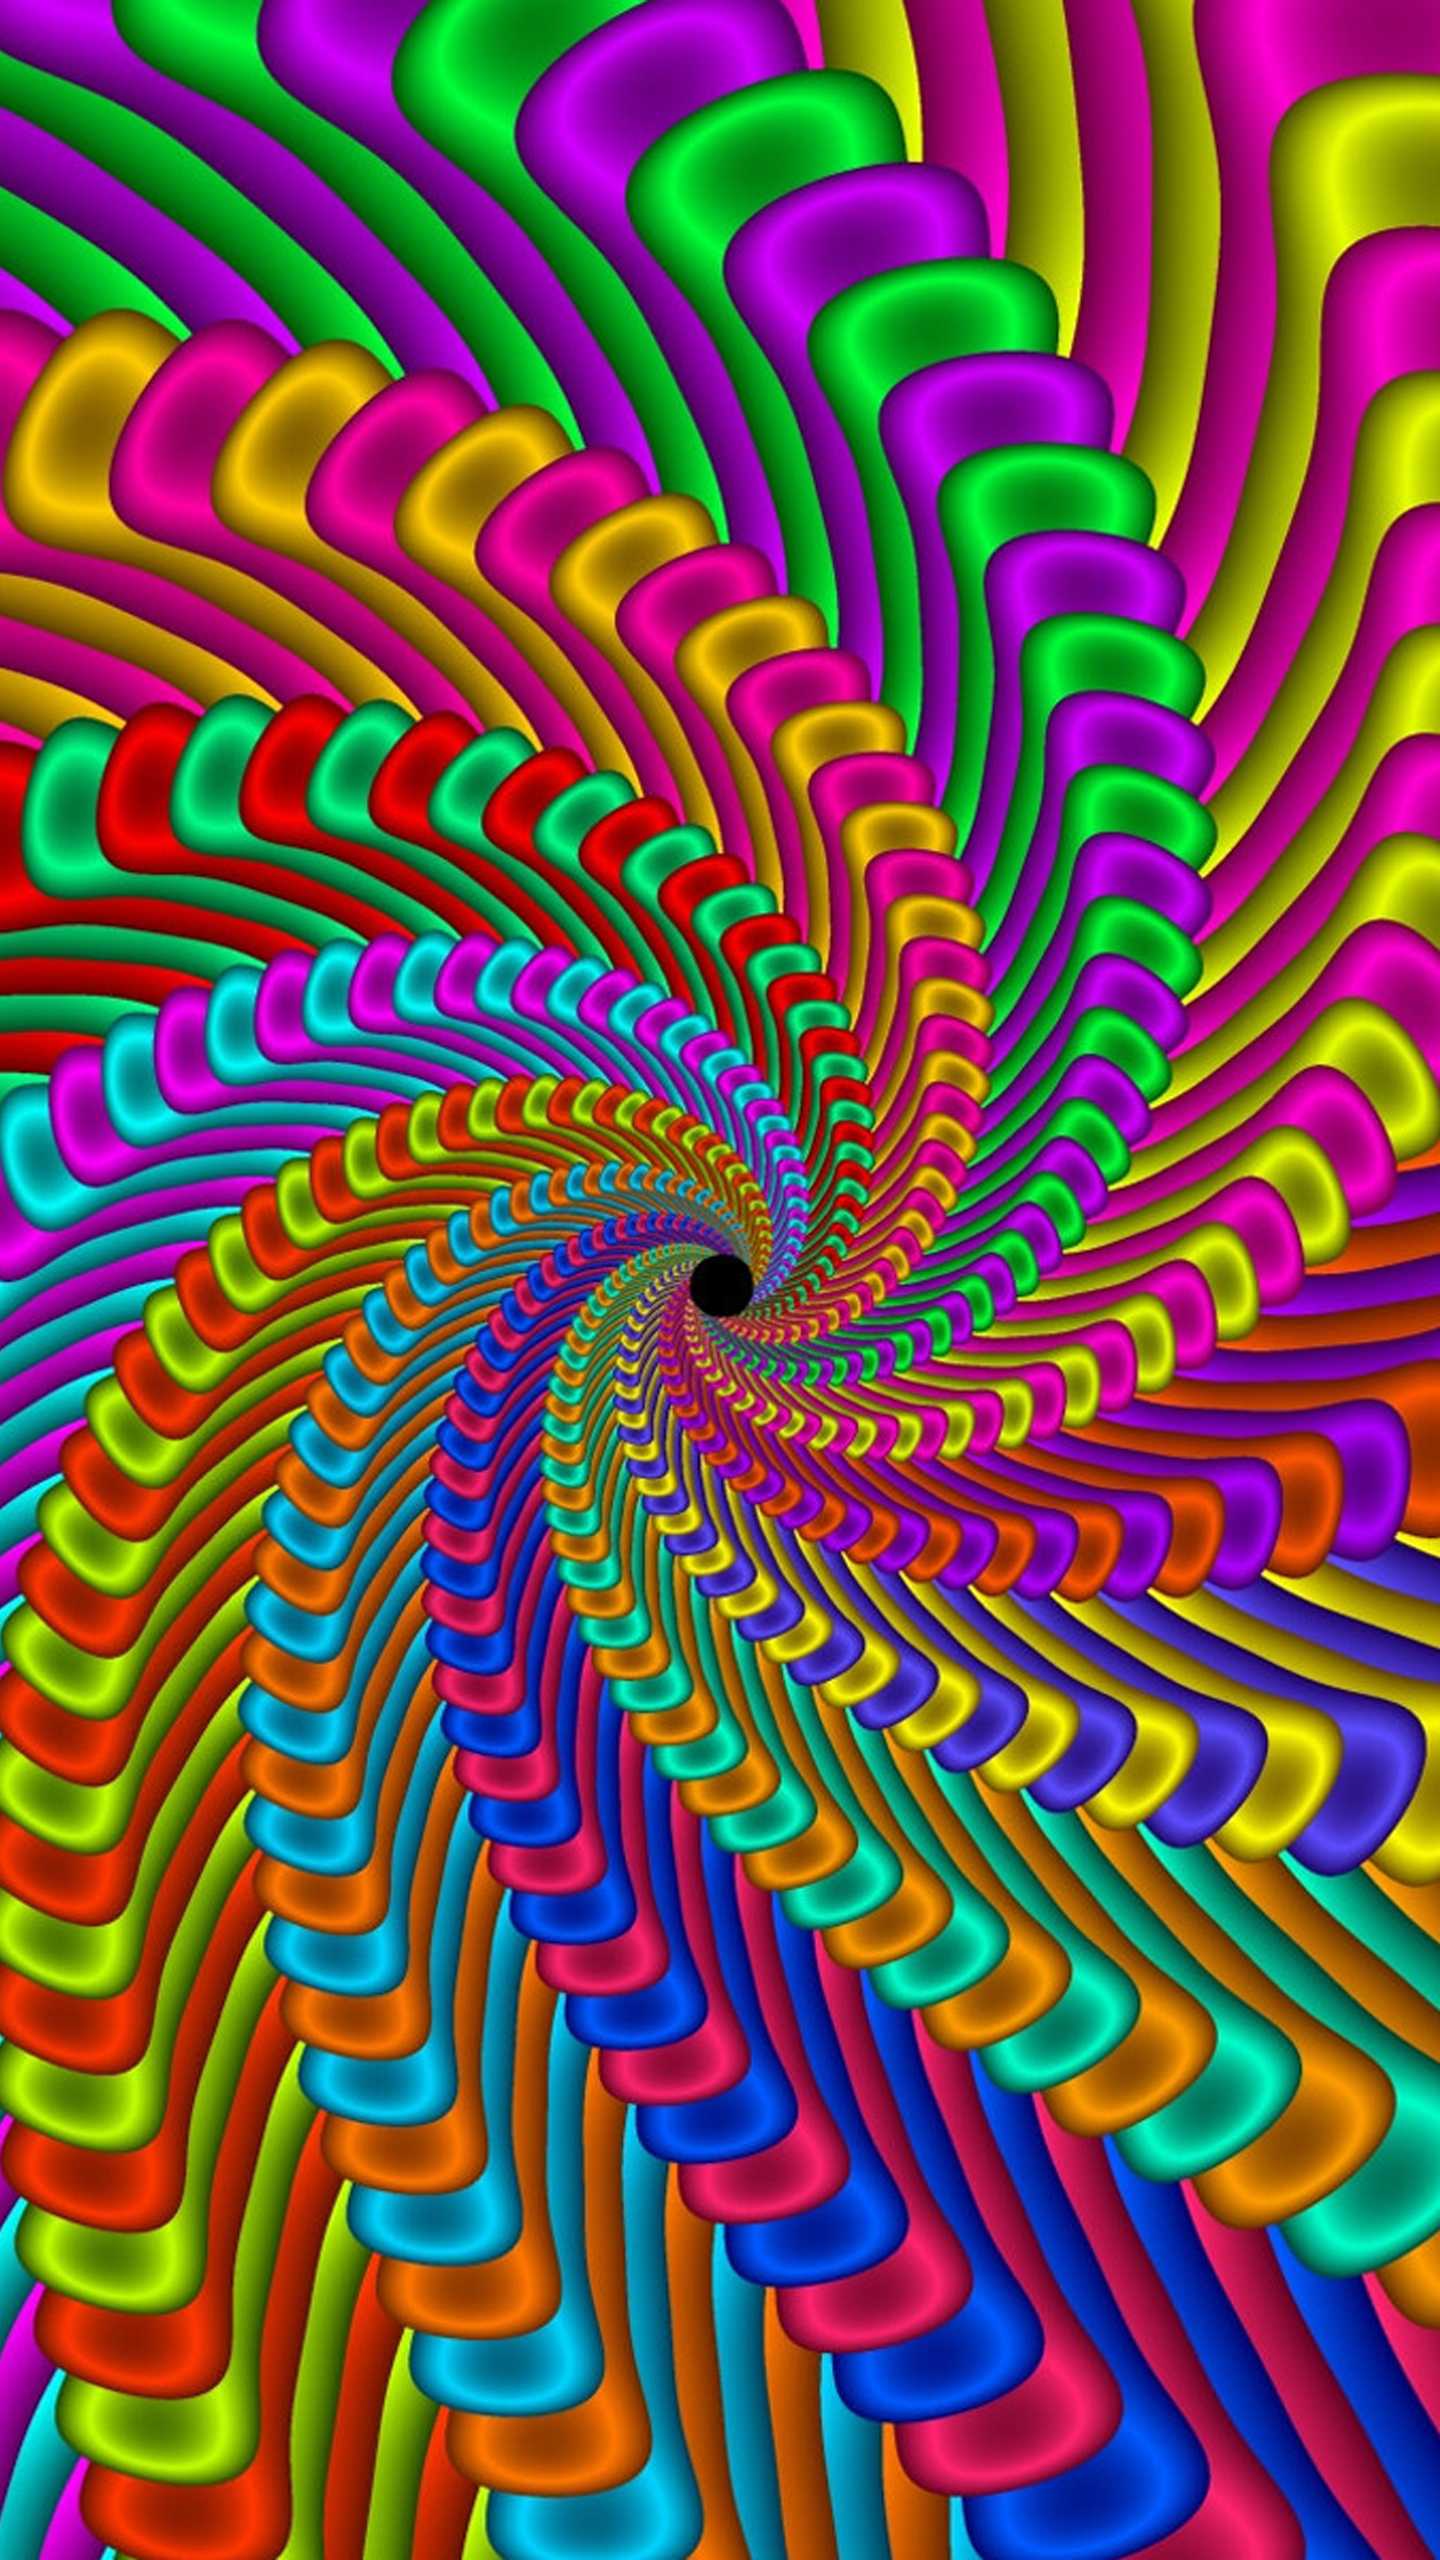 A colorful vortex of rainbow colors - Trippy